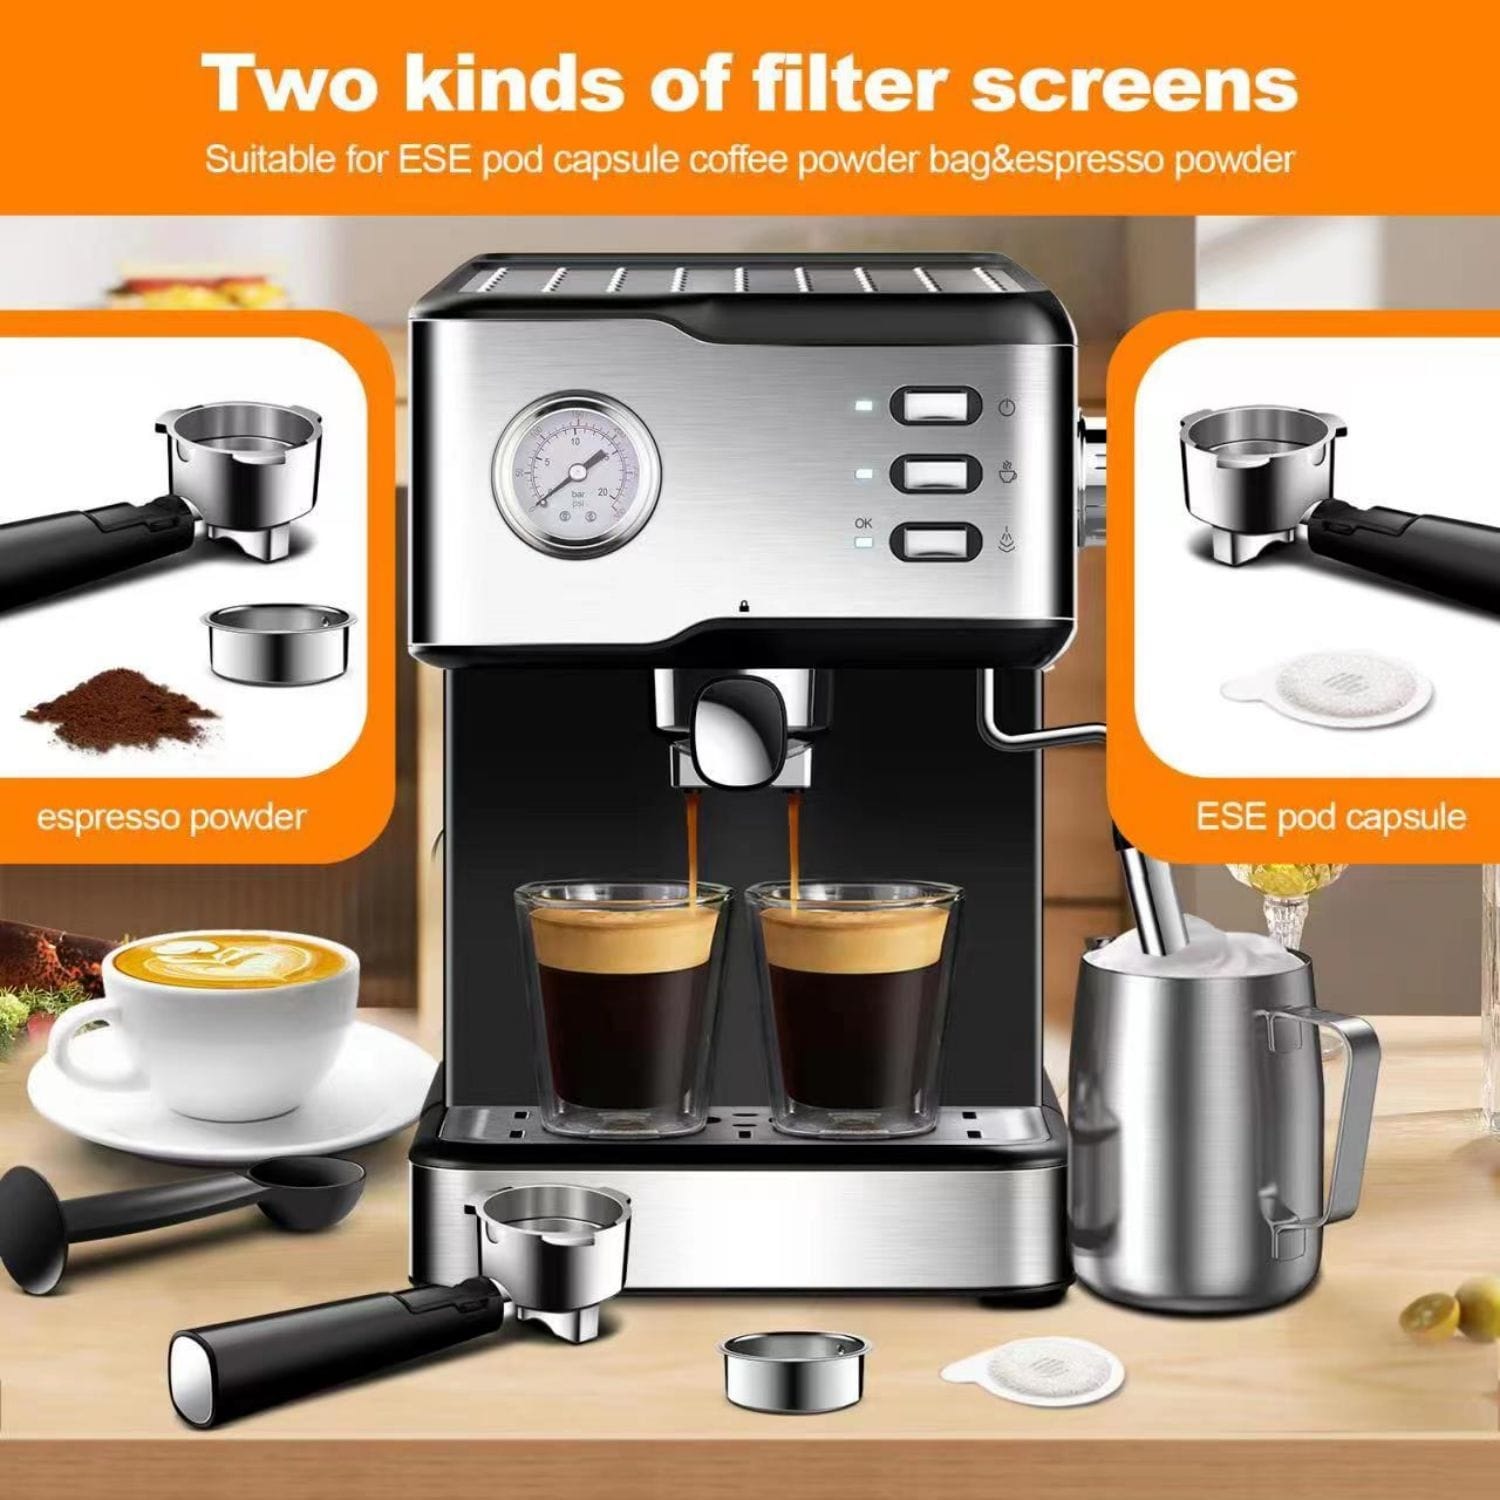 https://ak1.ostkcdn.com/images/products/is/images/direct/082f29970aafc1b3135bfb8cd46133d559881f23/20-Cup-Stainless-Steel-Semi-Automatic-Espresso-Machine-with-Pressure-Gauge-and-Milk-Frother-Steam-Wand.jpg